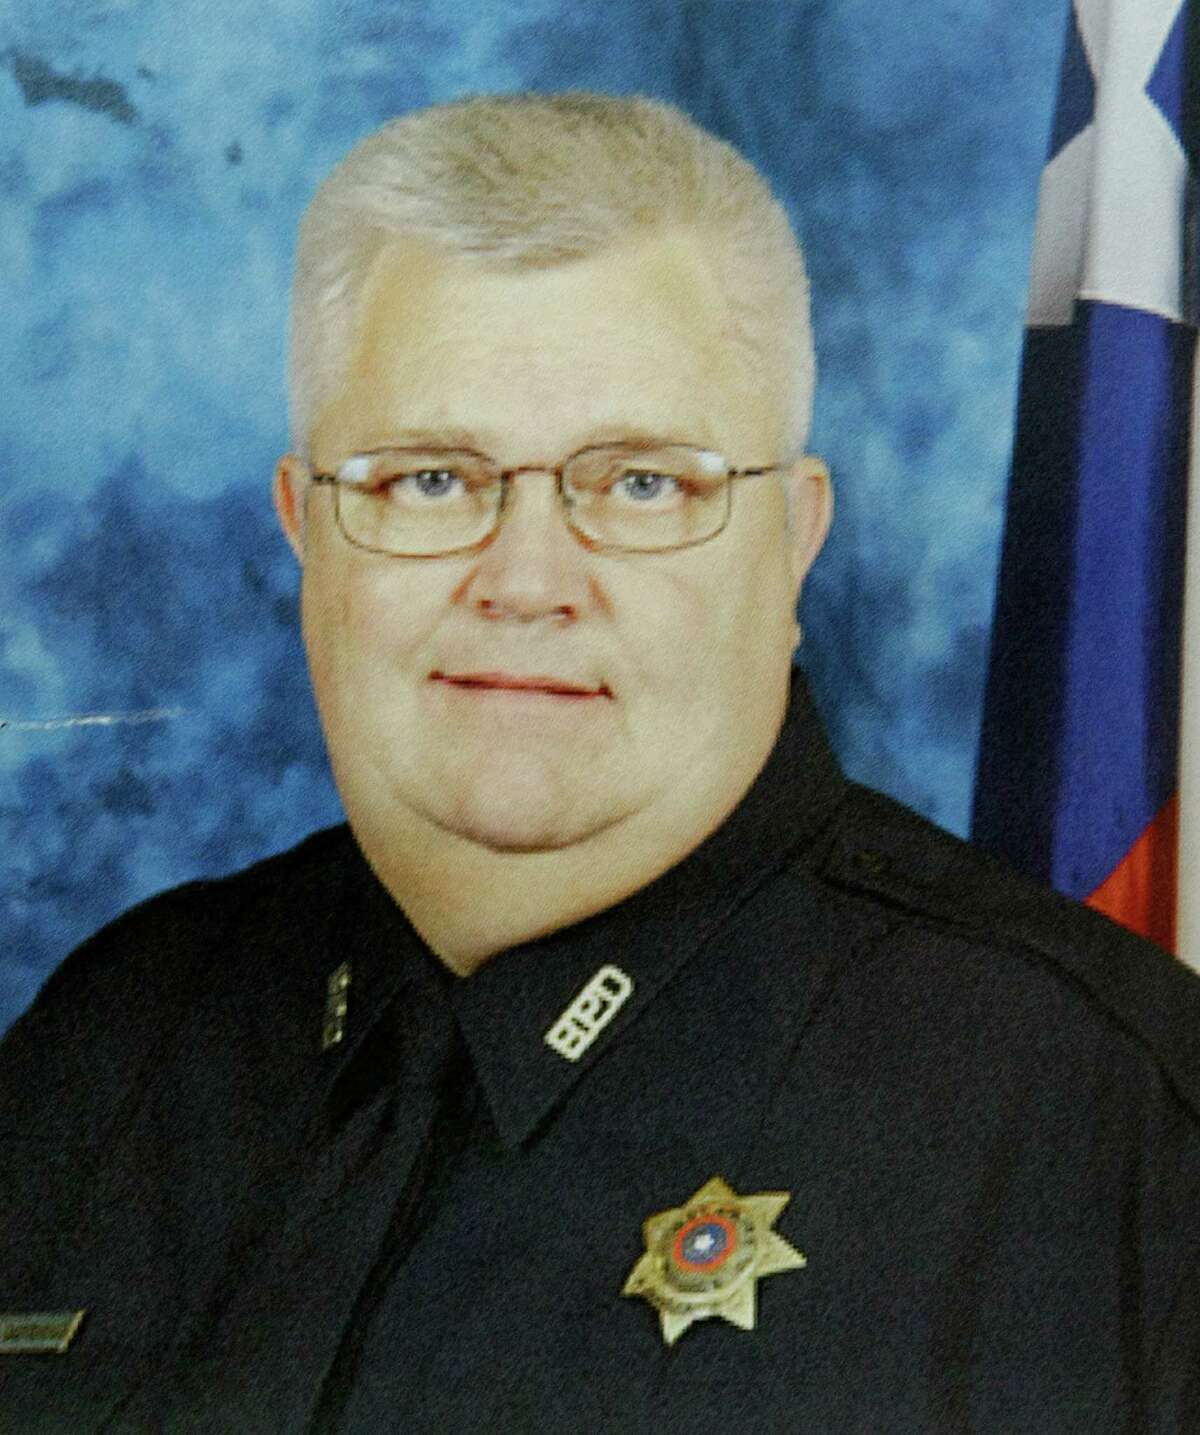 Handout photo of Bellaire Police Corporal Jimmie Norman who was on of two people shot and killed by by a motorist who fled following a traffic stop Monday morning Monday, Dec. 24, 2012, in Houston. The suspected gunman was wounded. ( Johnny Hanson / Houston Chronicle )